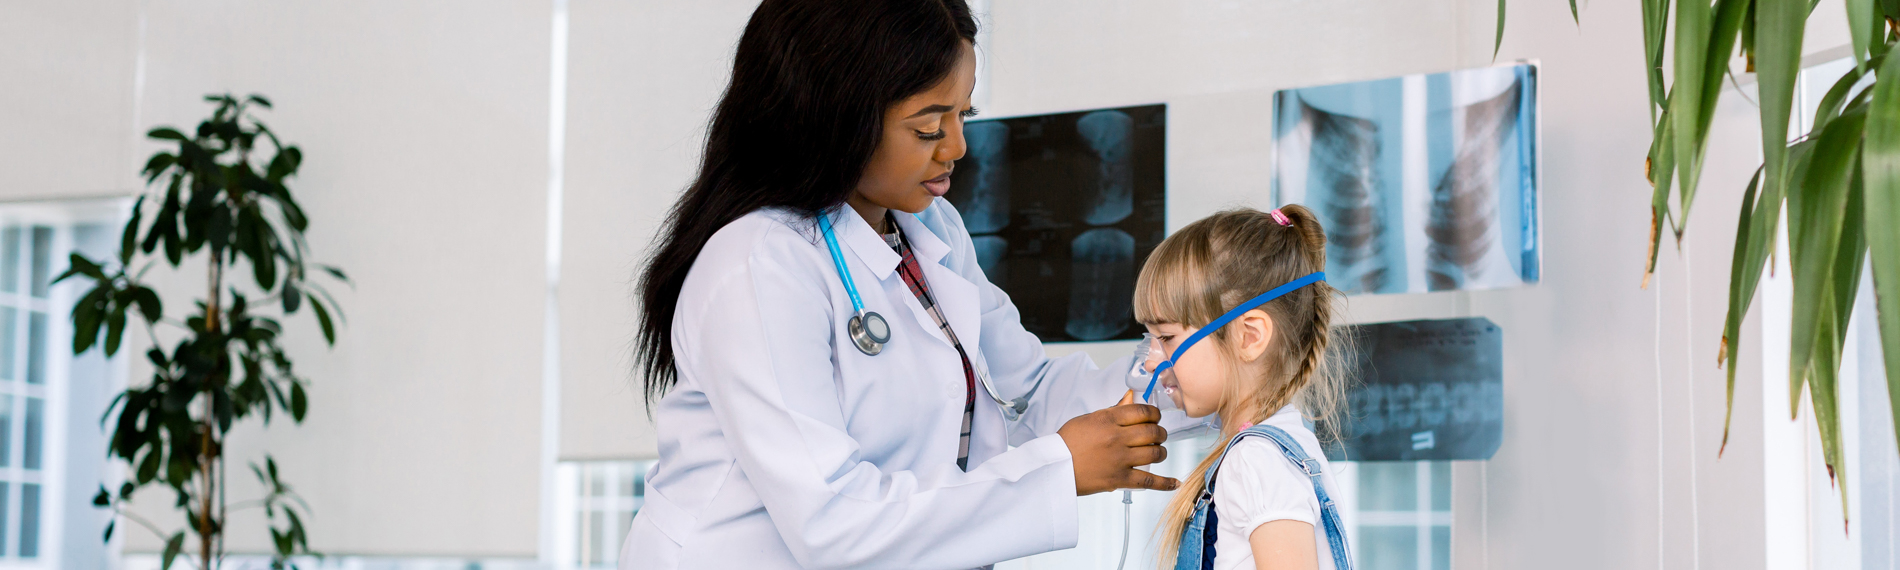 A respiratory care professional takes care of a young girl.